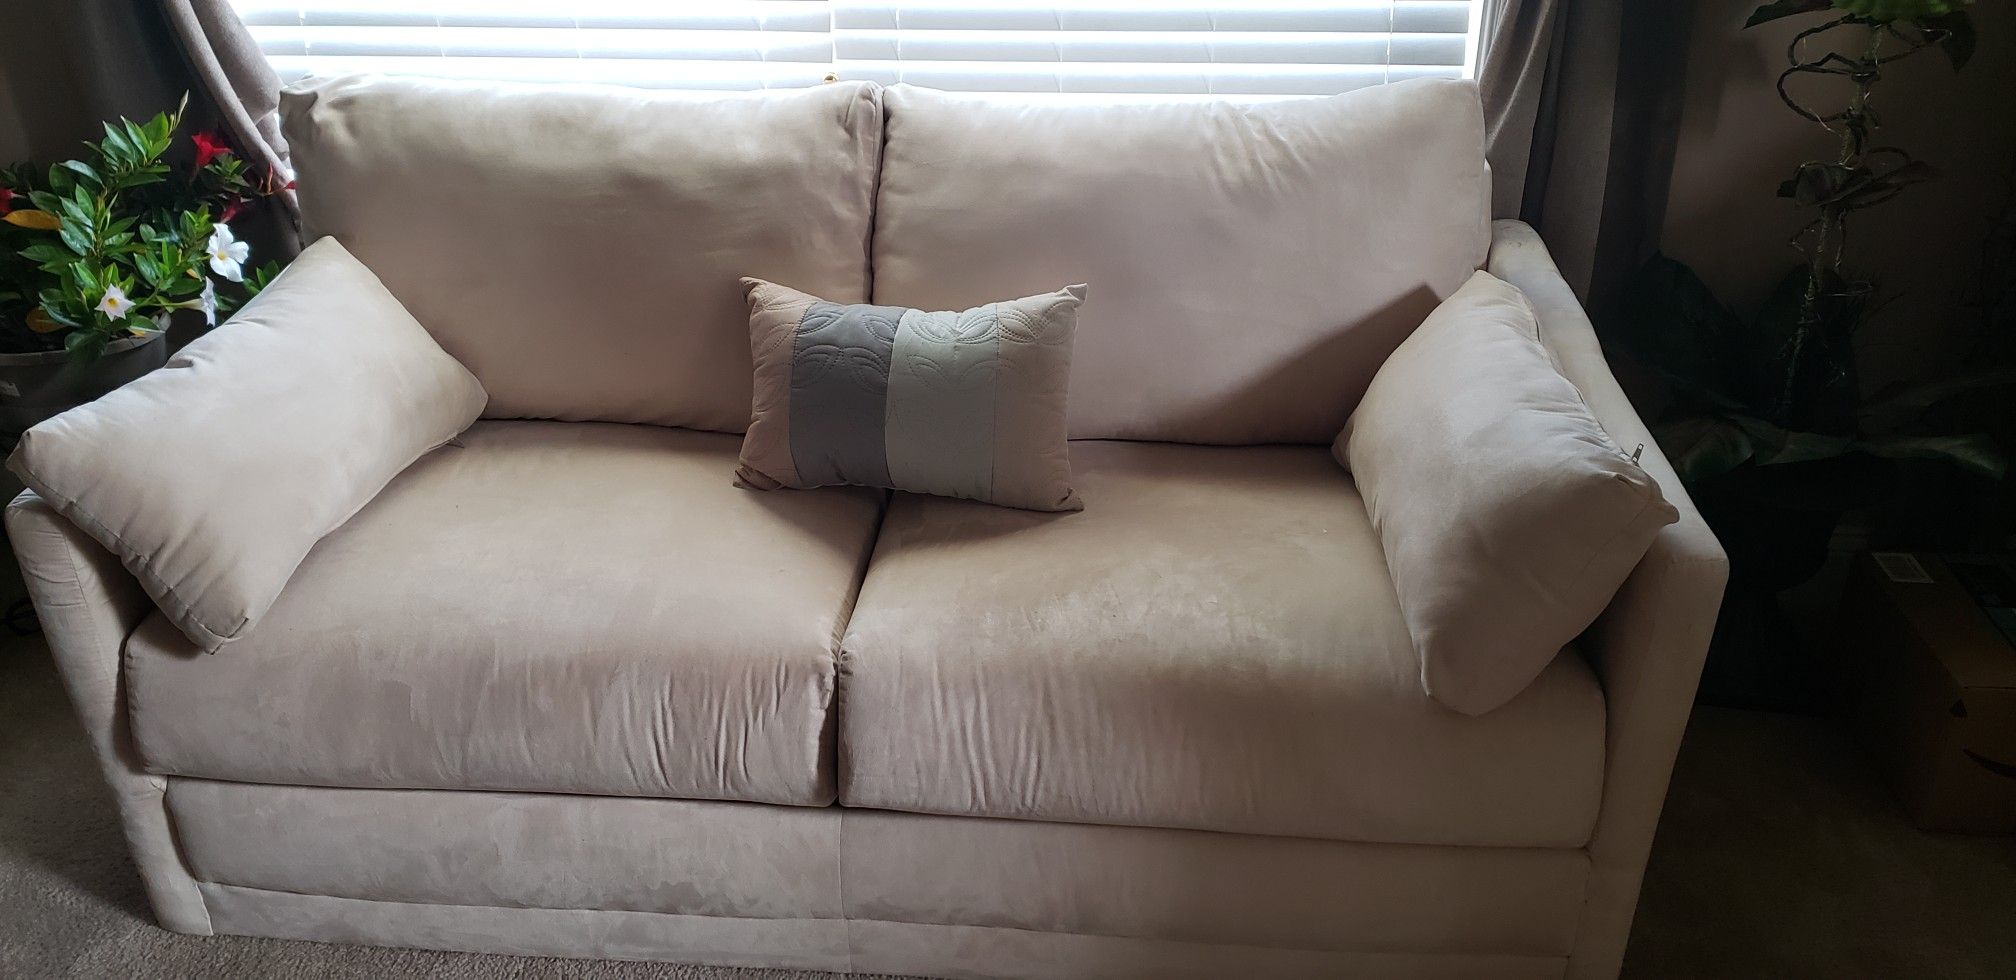 Full size sleeper sofa, excellent condition